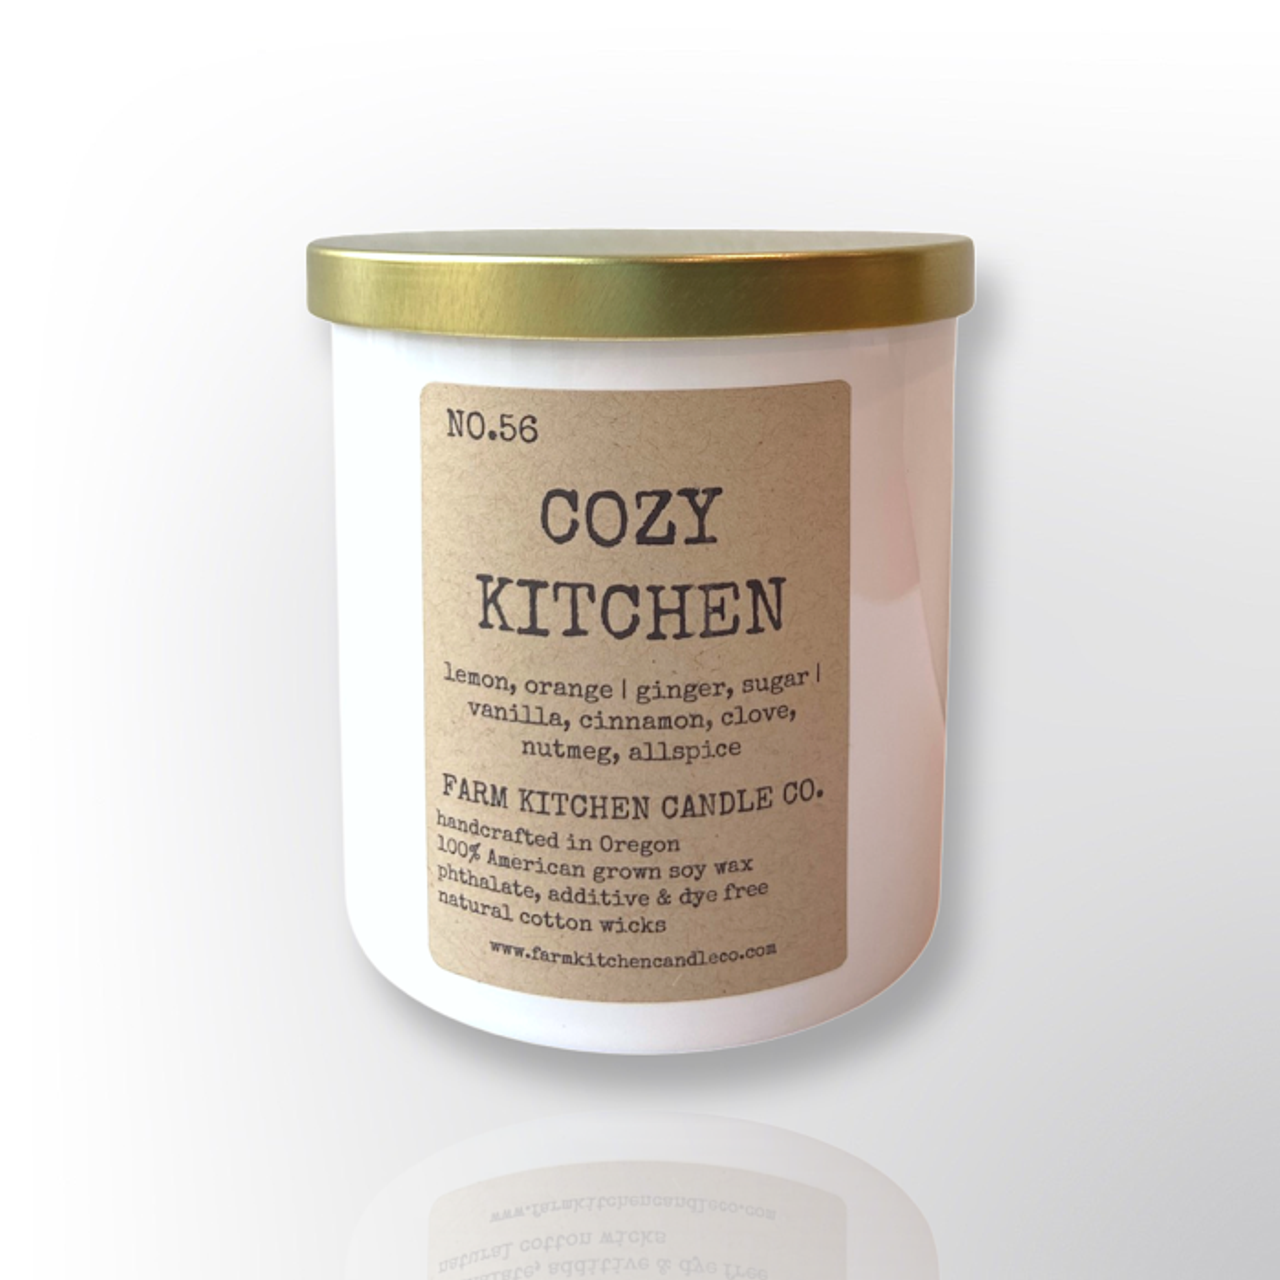 FARM KITCHEN CANDLE CO - SINGLE WICK SOY CANDLE IN COZY KITCHEN